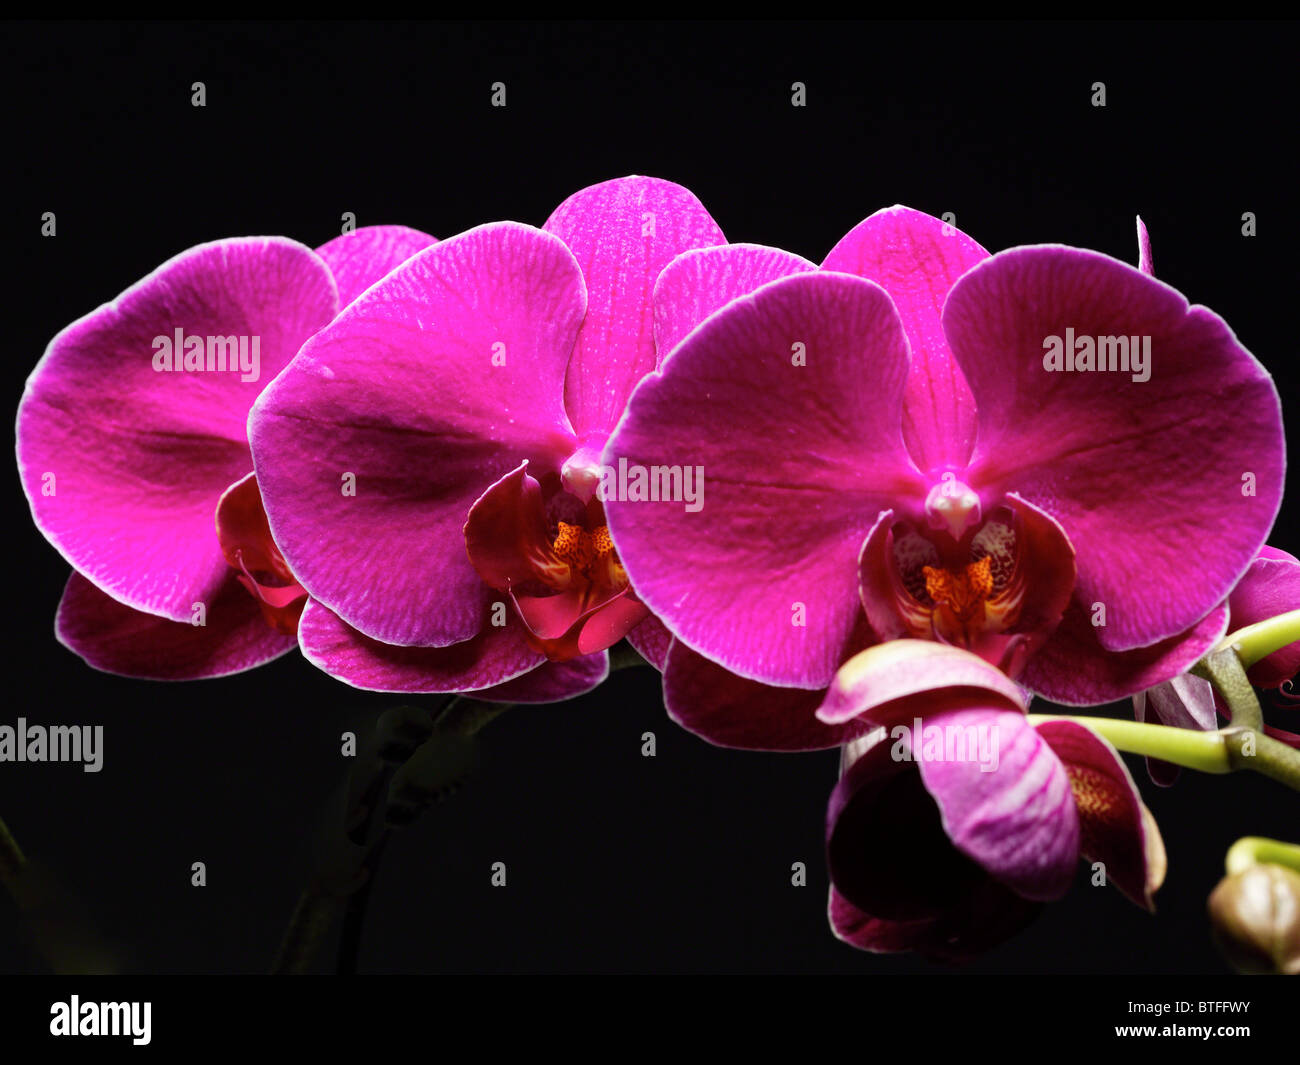 Close Up View of a Red Phalaenopsis Orchid against Balck Background Stock Photo